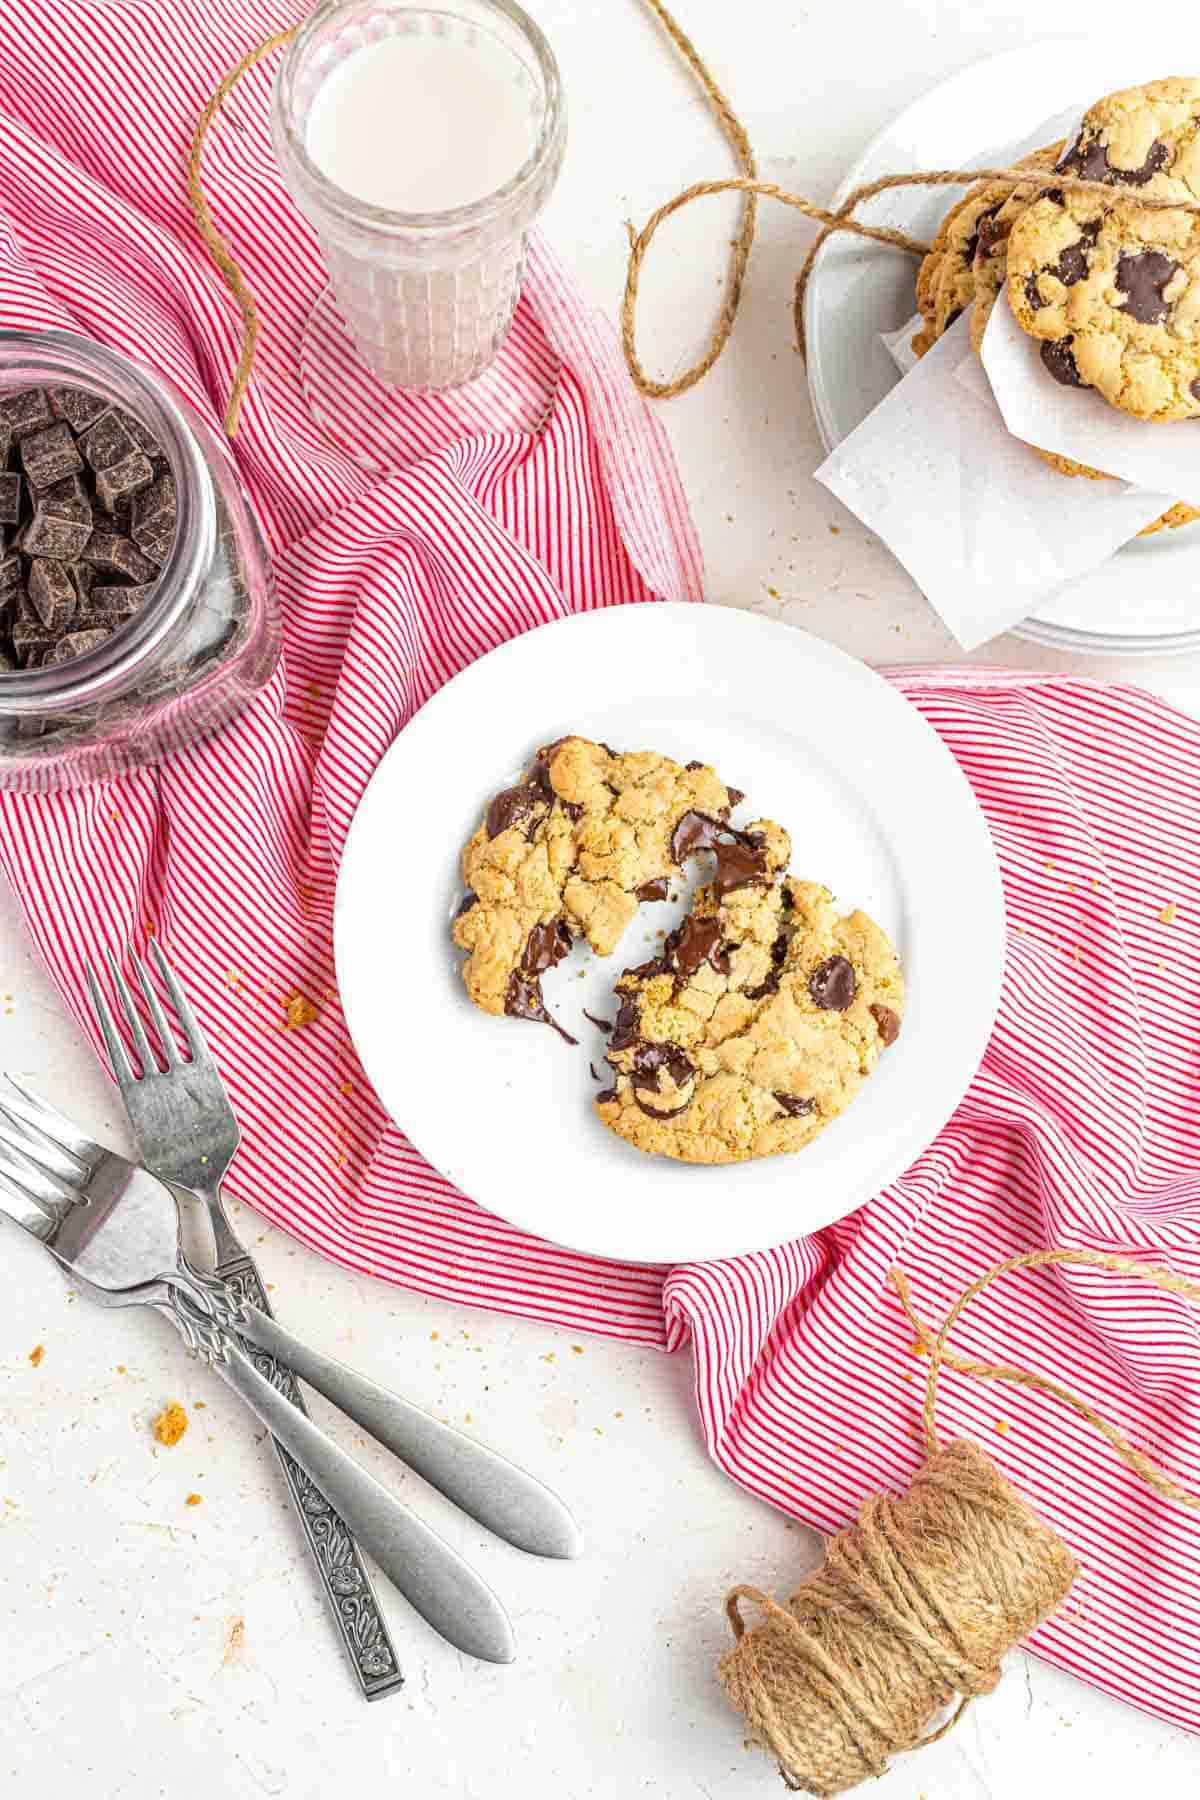 Two Halves of a Gluten Free Chocolate Chip Cookie on a Plate Beside Three Metal Forks